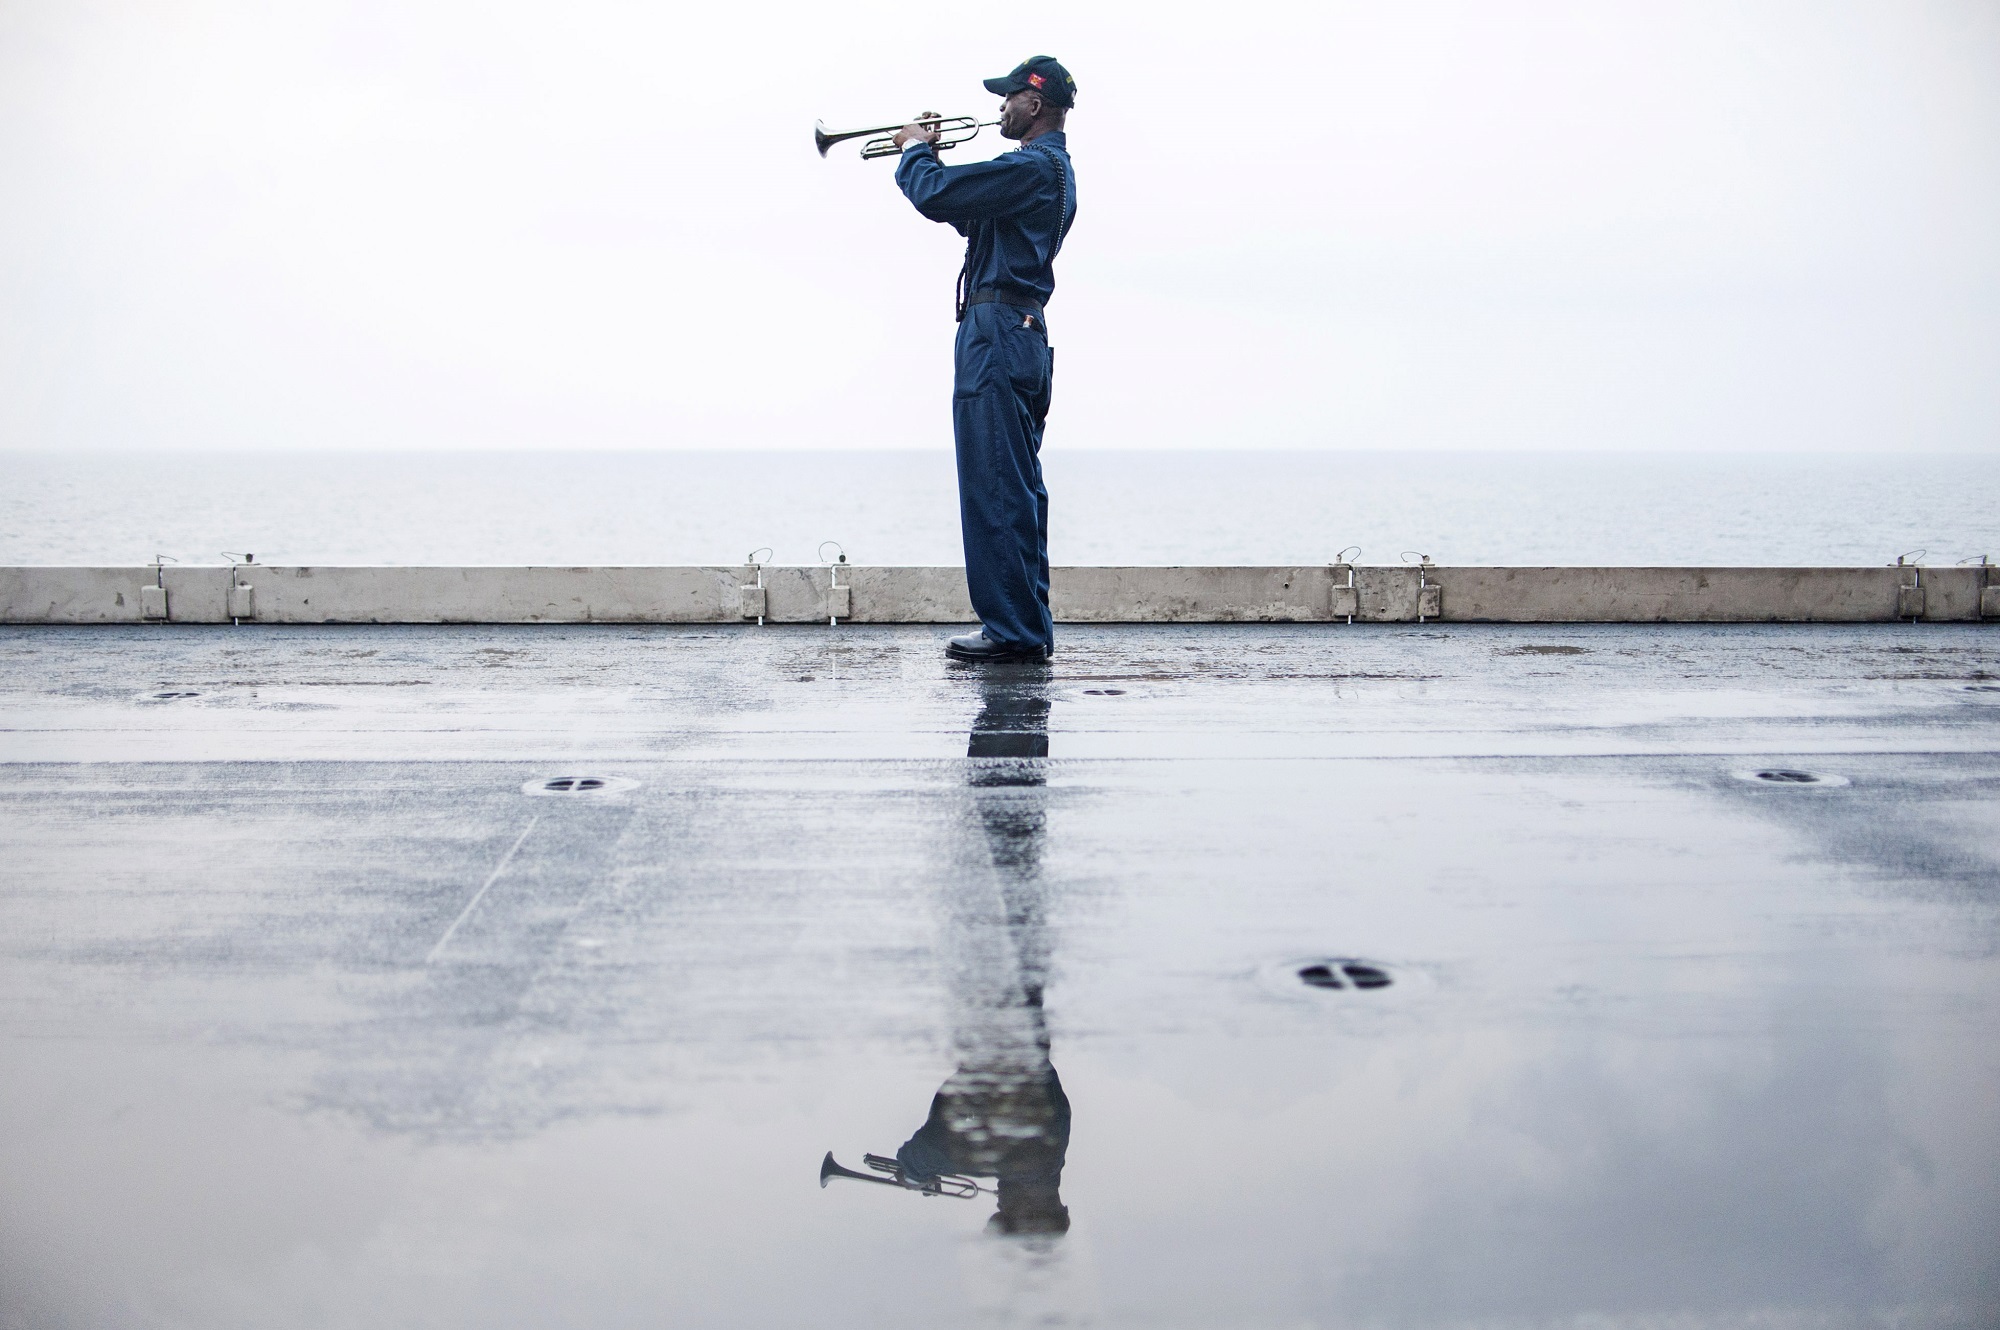 Military trumpeter photo